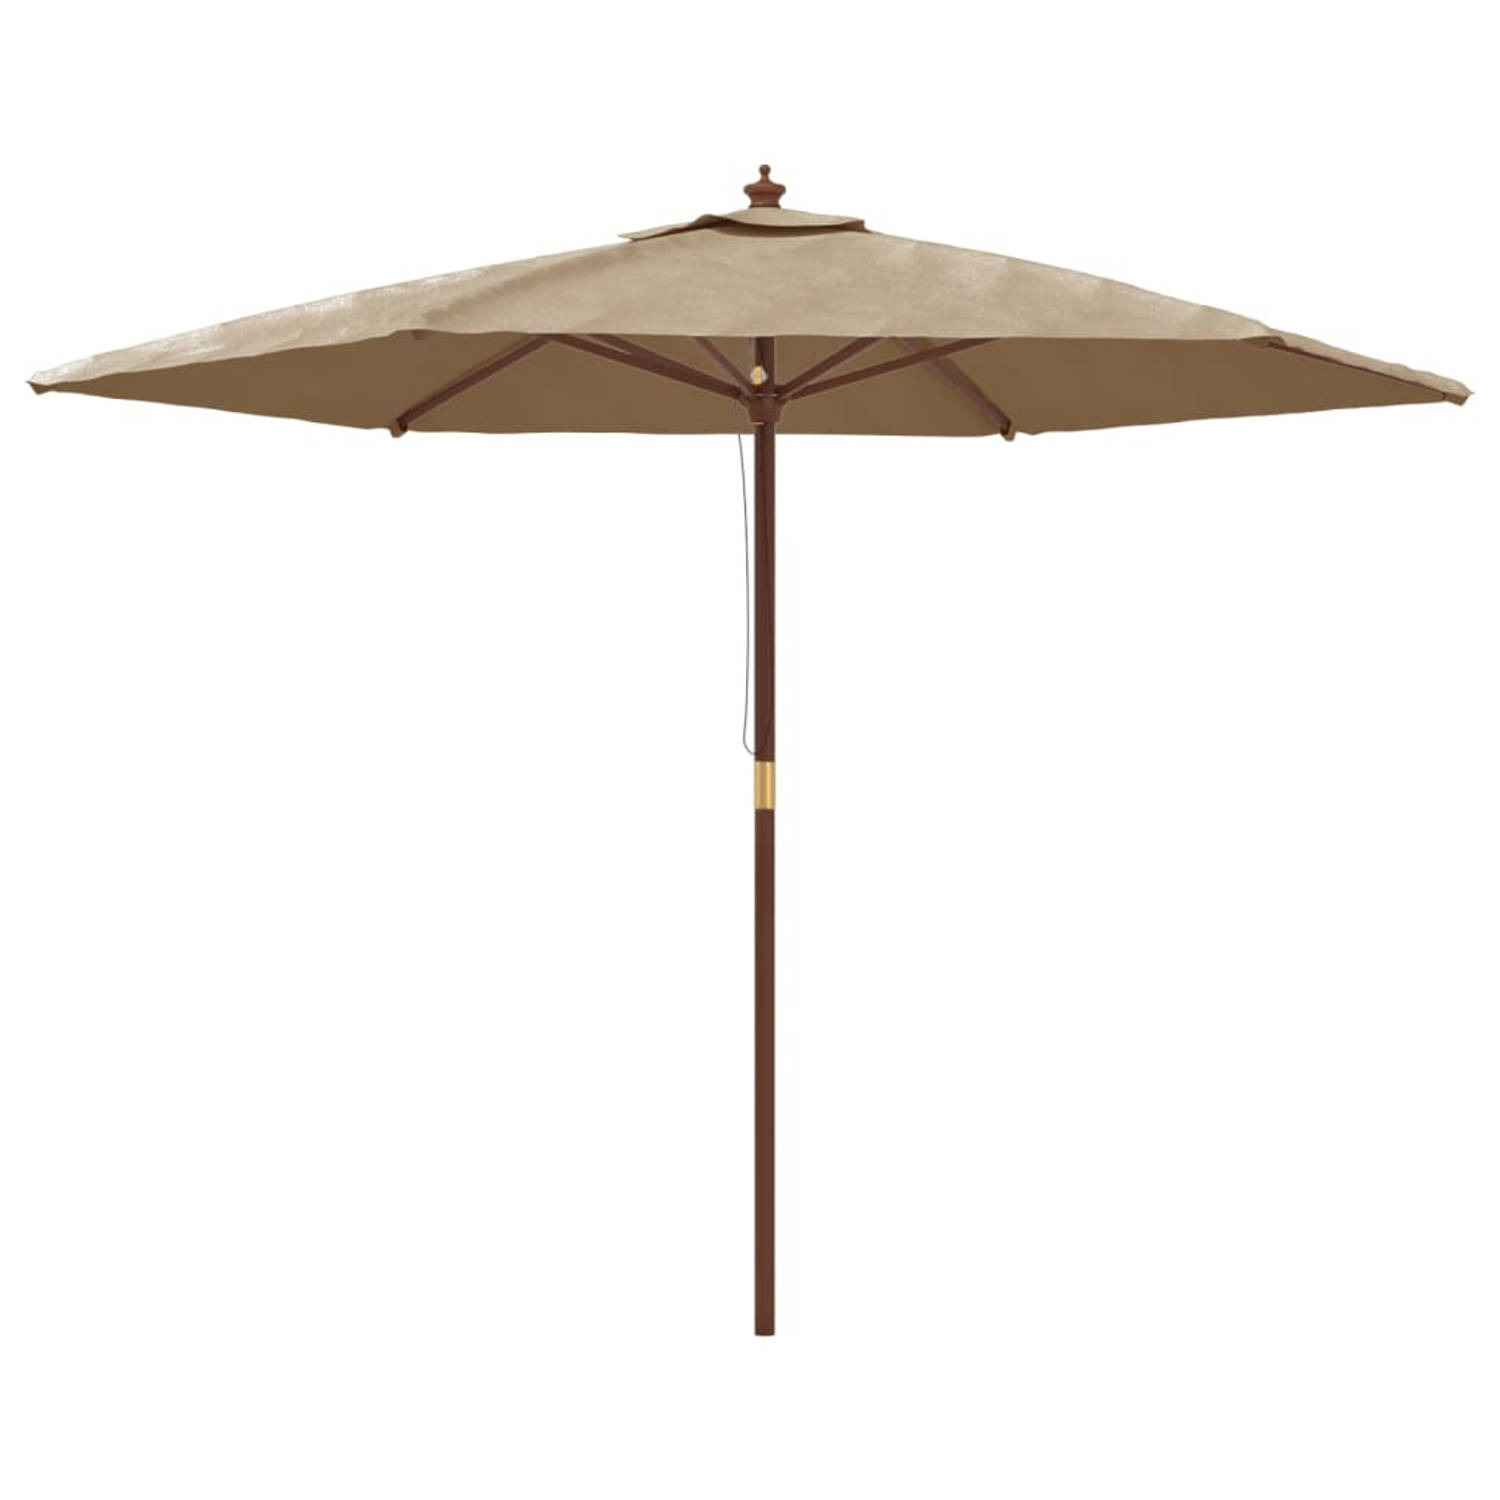 The Living Store Parasol - Hardhout - Polyester - 299 x 240 cm - Taupe